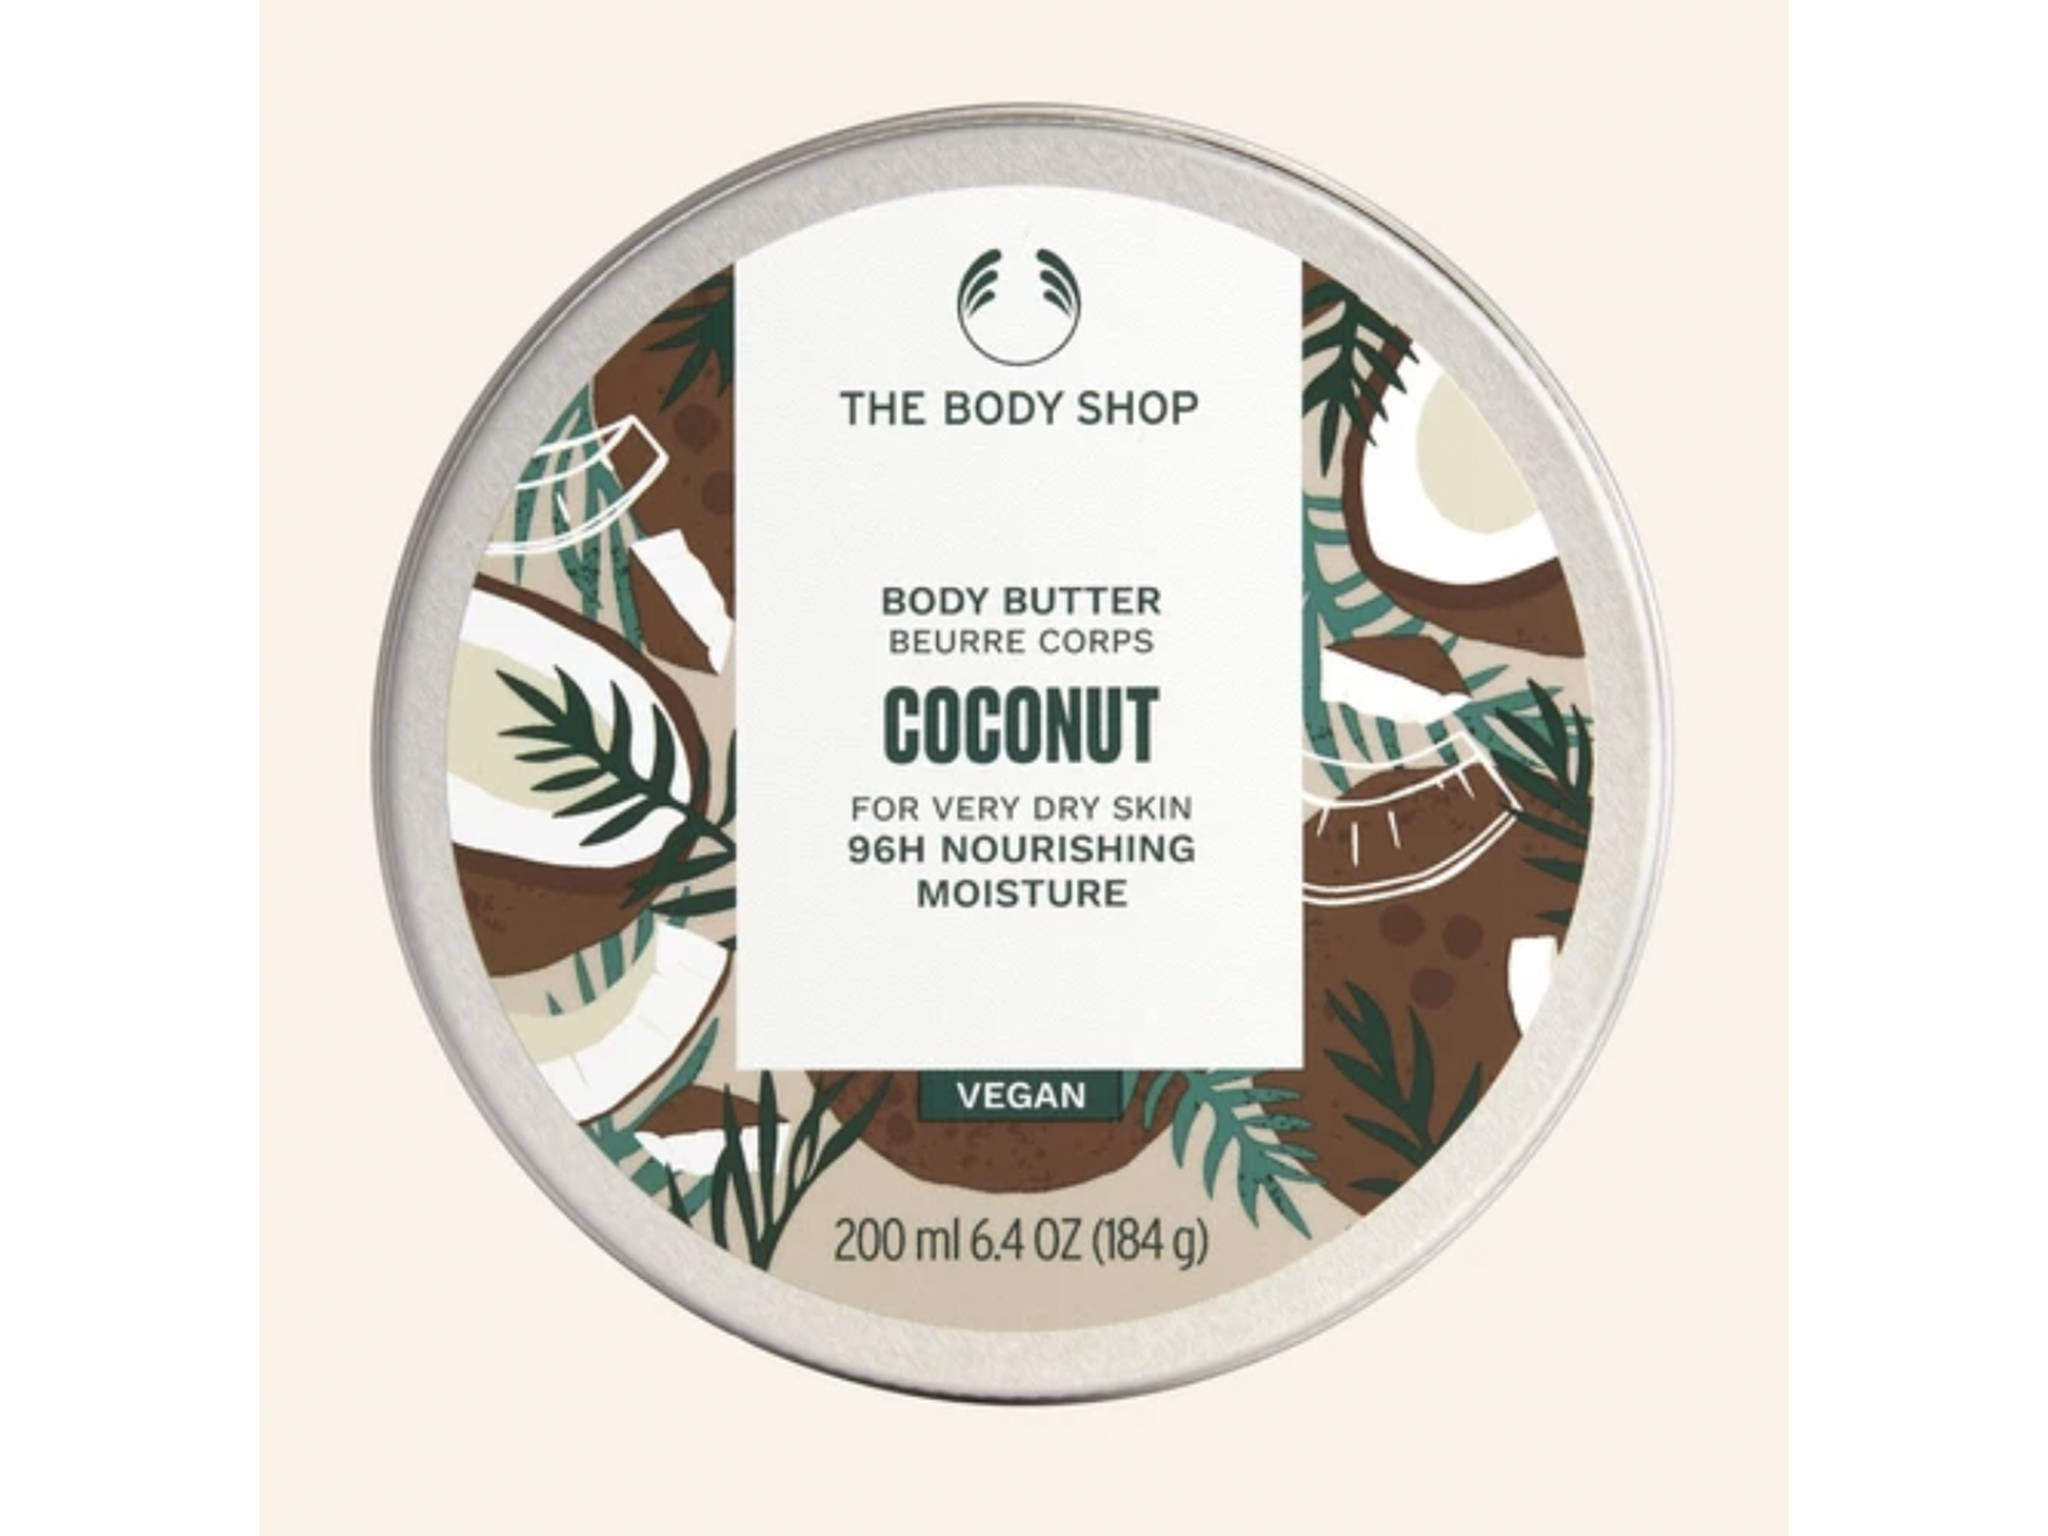 Bargain beauty buys The Body Shop coconut body butter